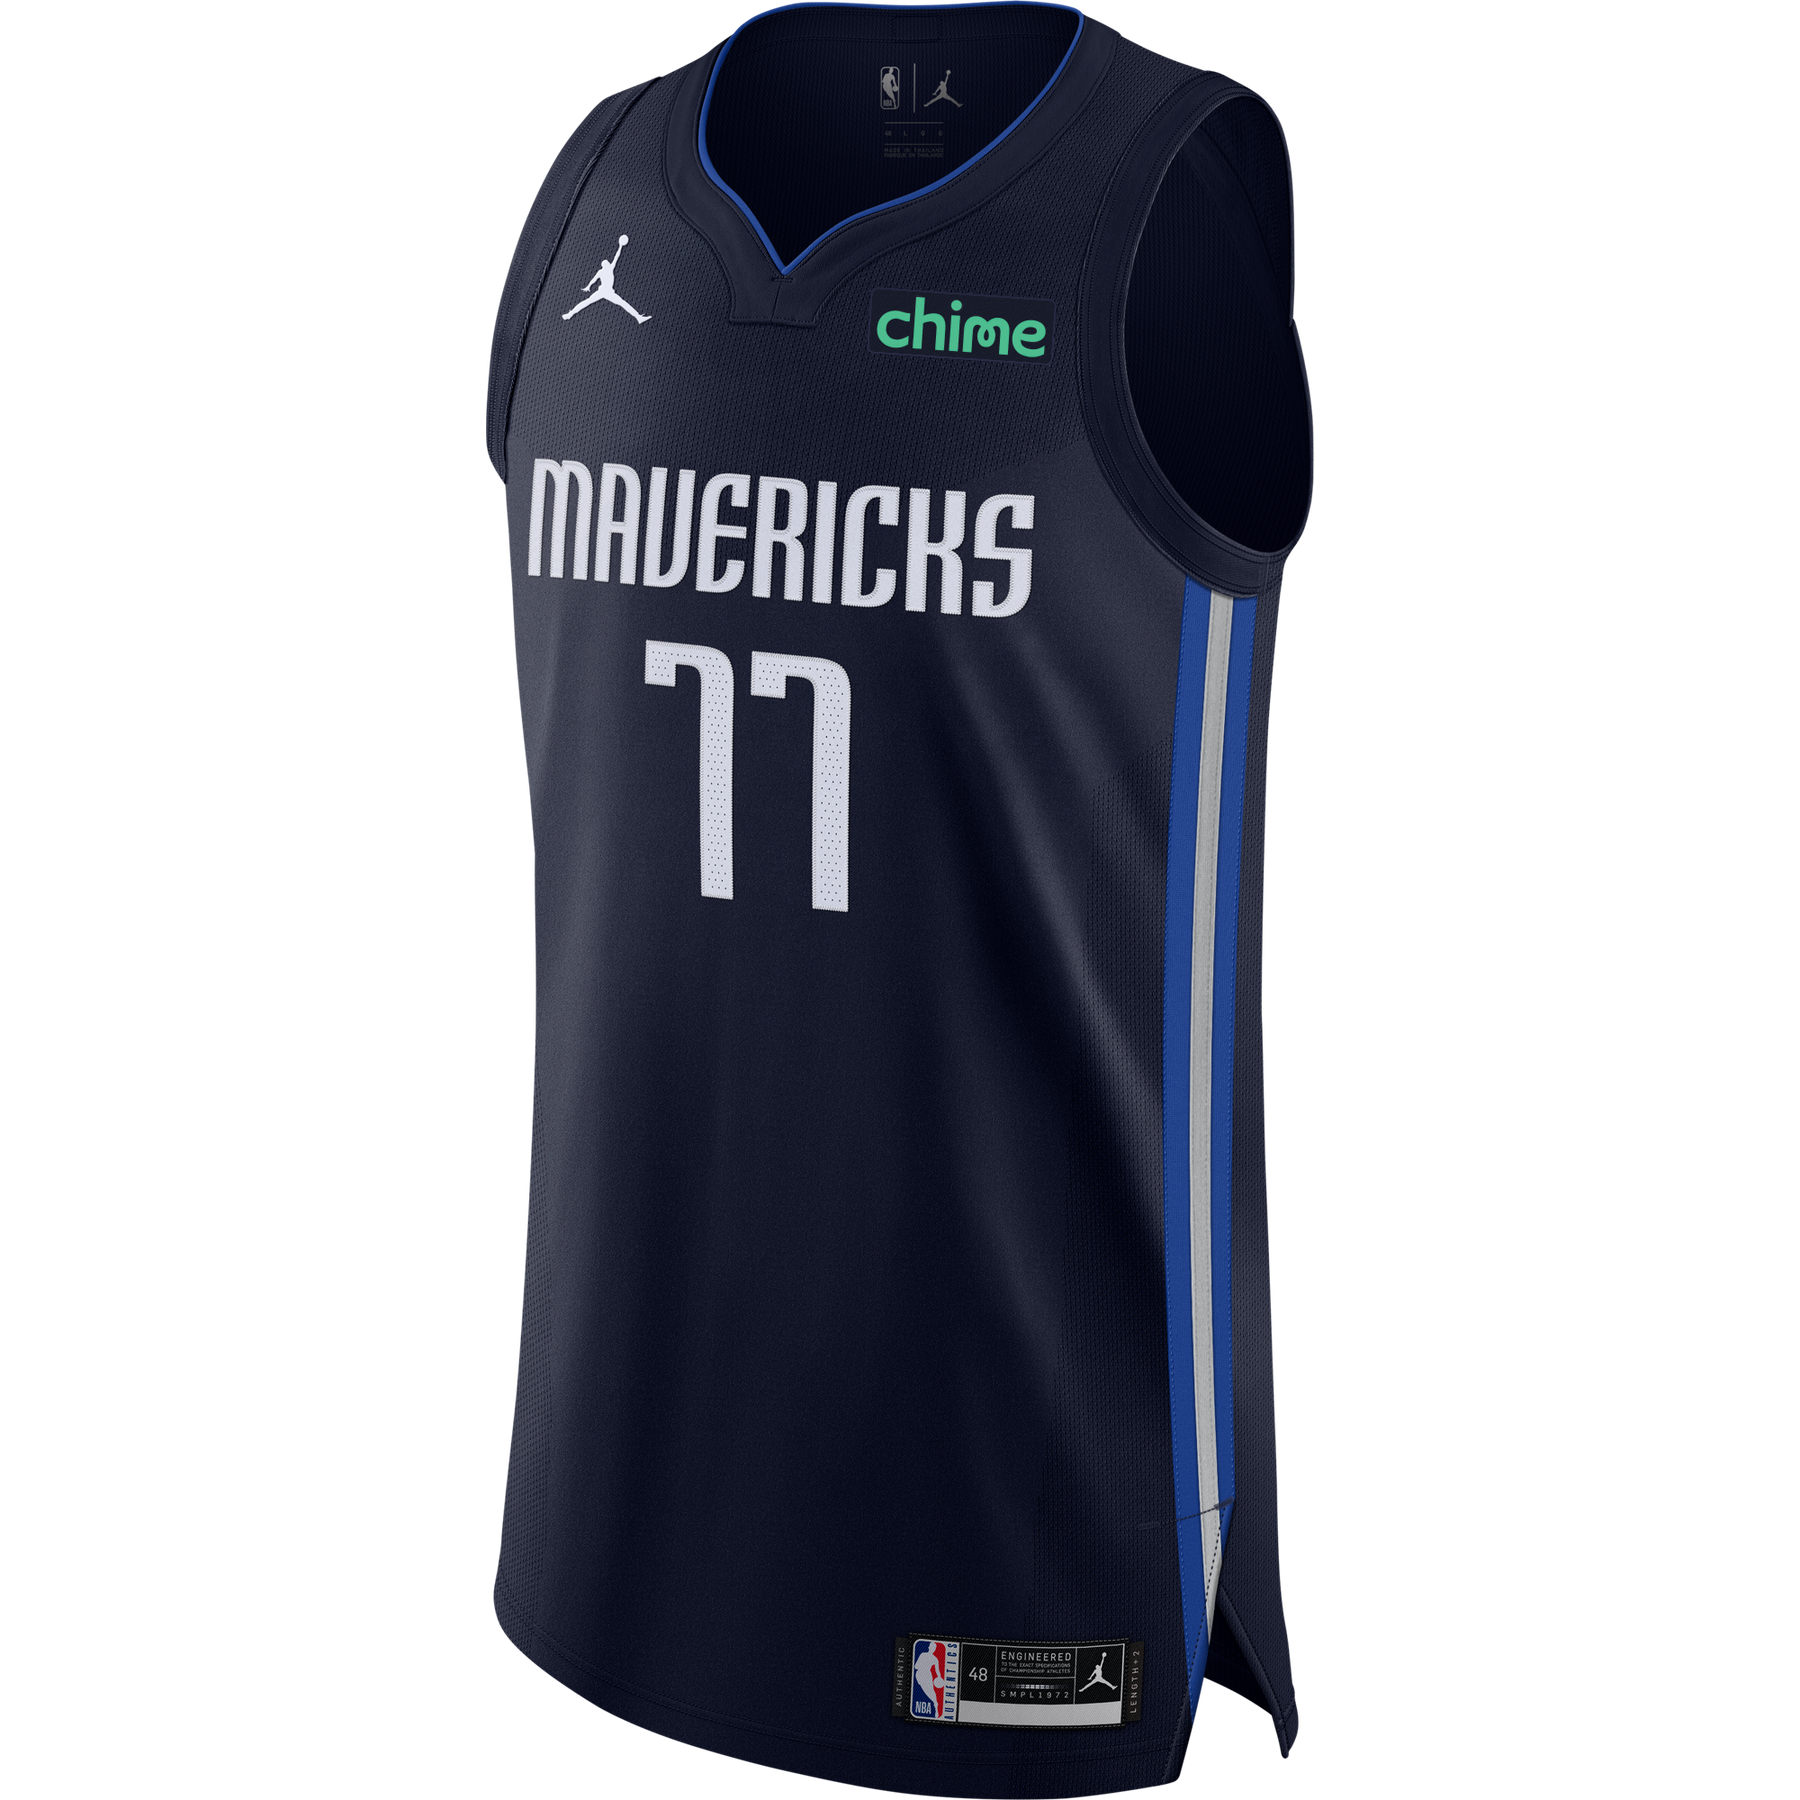 3 takeaways from the Mavericks' 120-114 loss aga luka doncic jersey blue  inst the Wizards Dallas Mavericks JERSEYS, NBA CITY JERSEYS, NBA BASKETBALL  JERSEY ,Nba Jerseys ,Mavericks T-SHIRTS Top Gun: Maverick-Dallas Mavericks